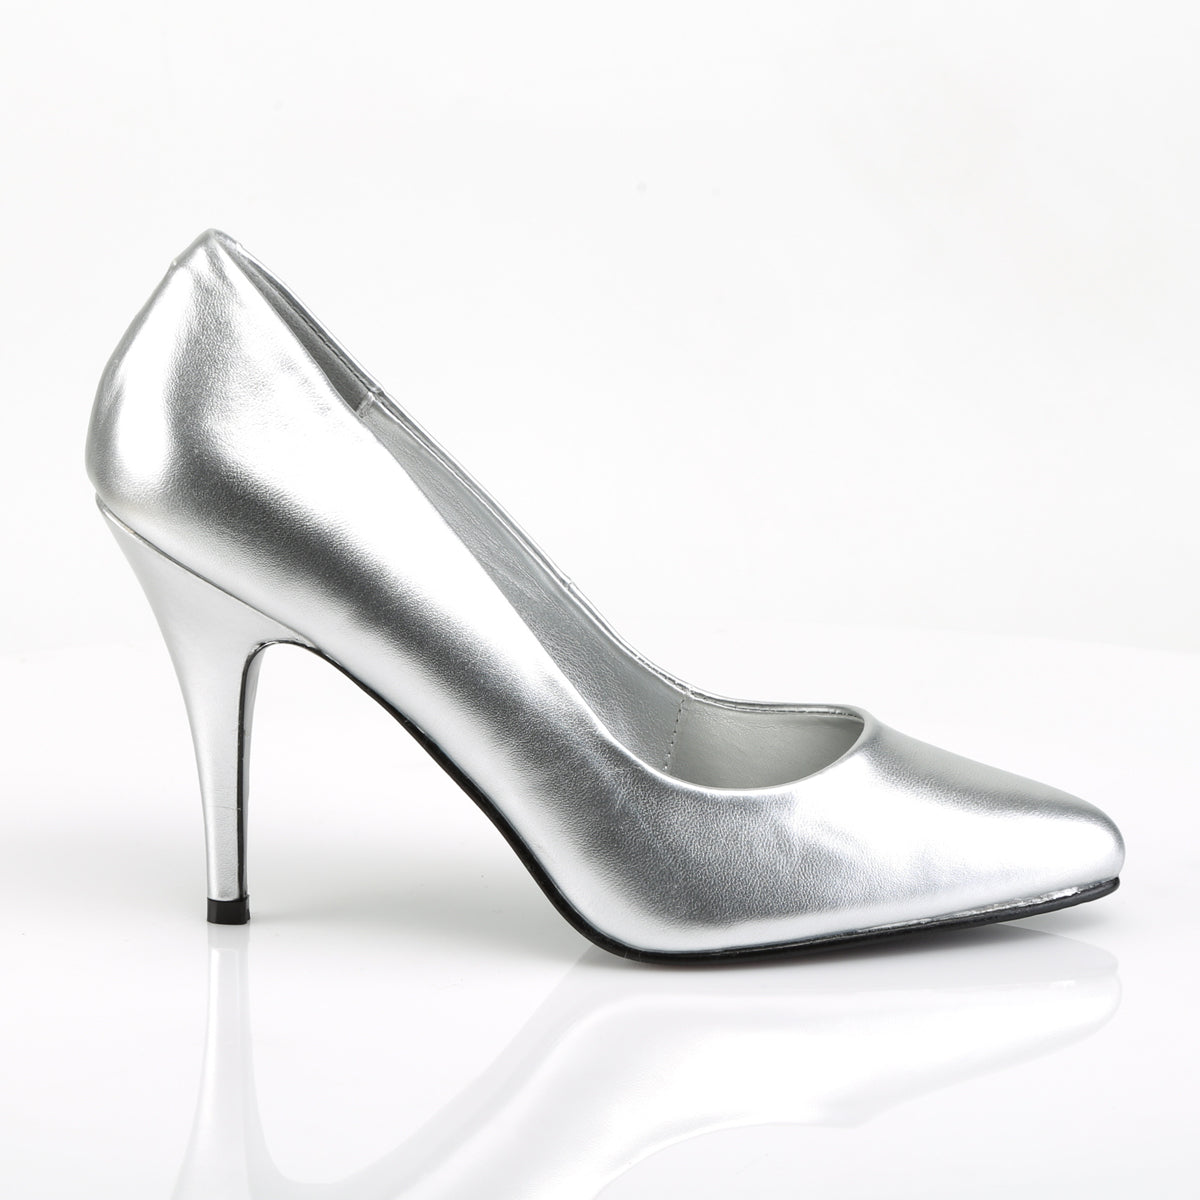 VANITY-420 Silver Faux Leather Pump Pleaser